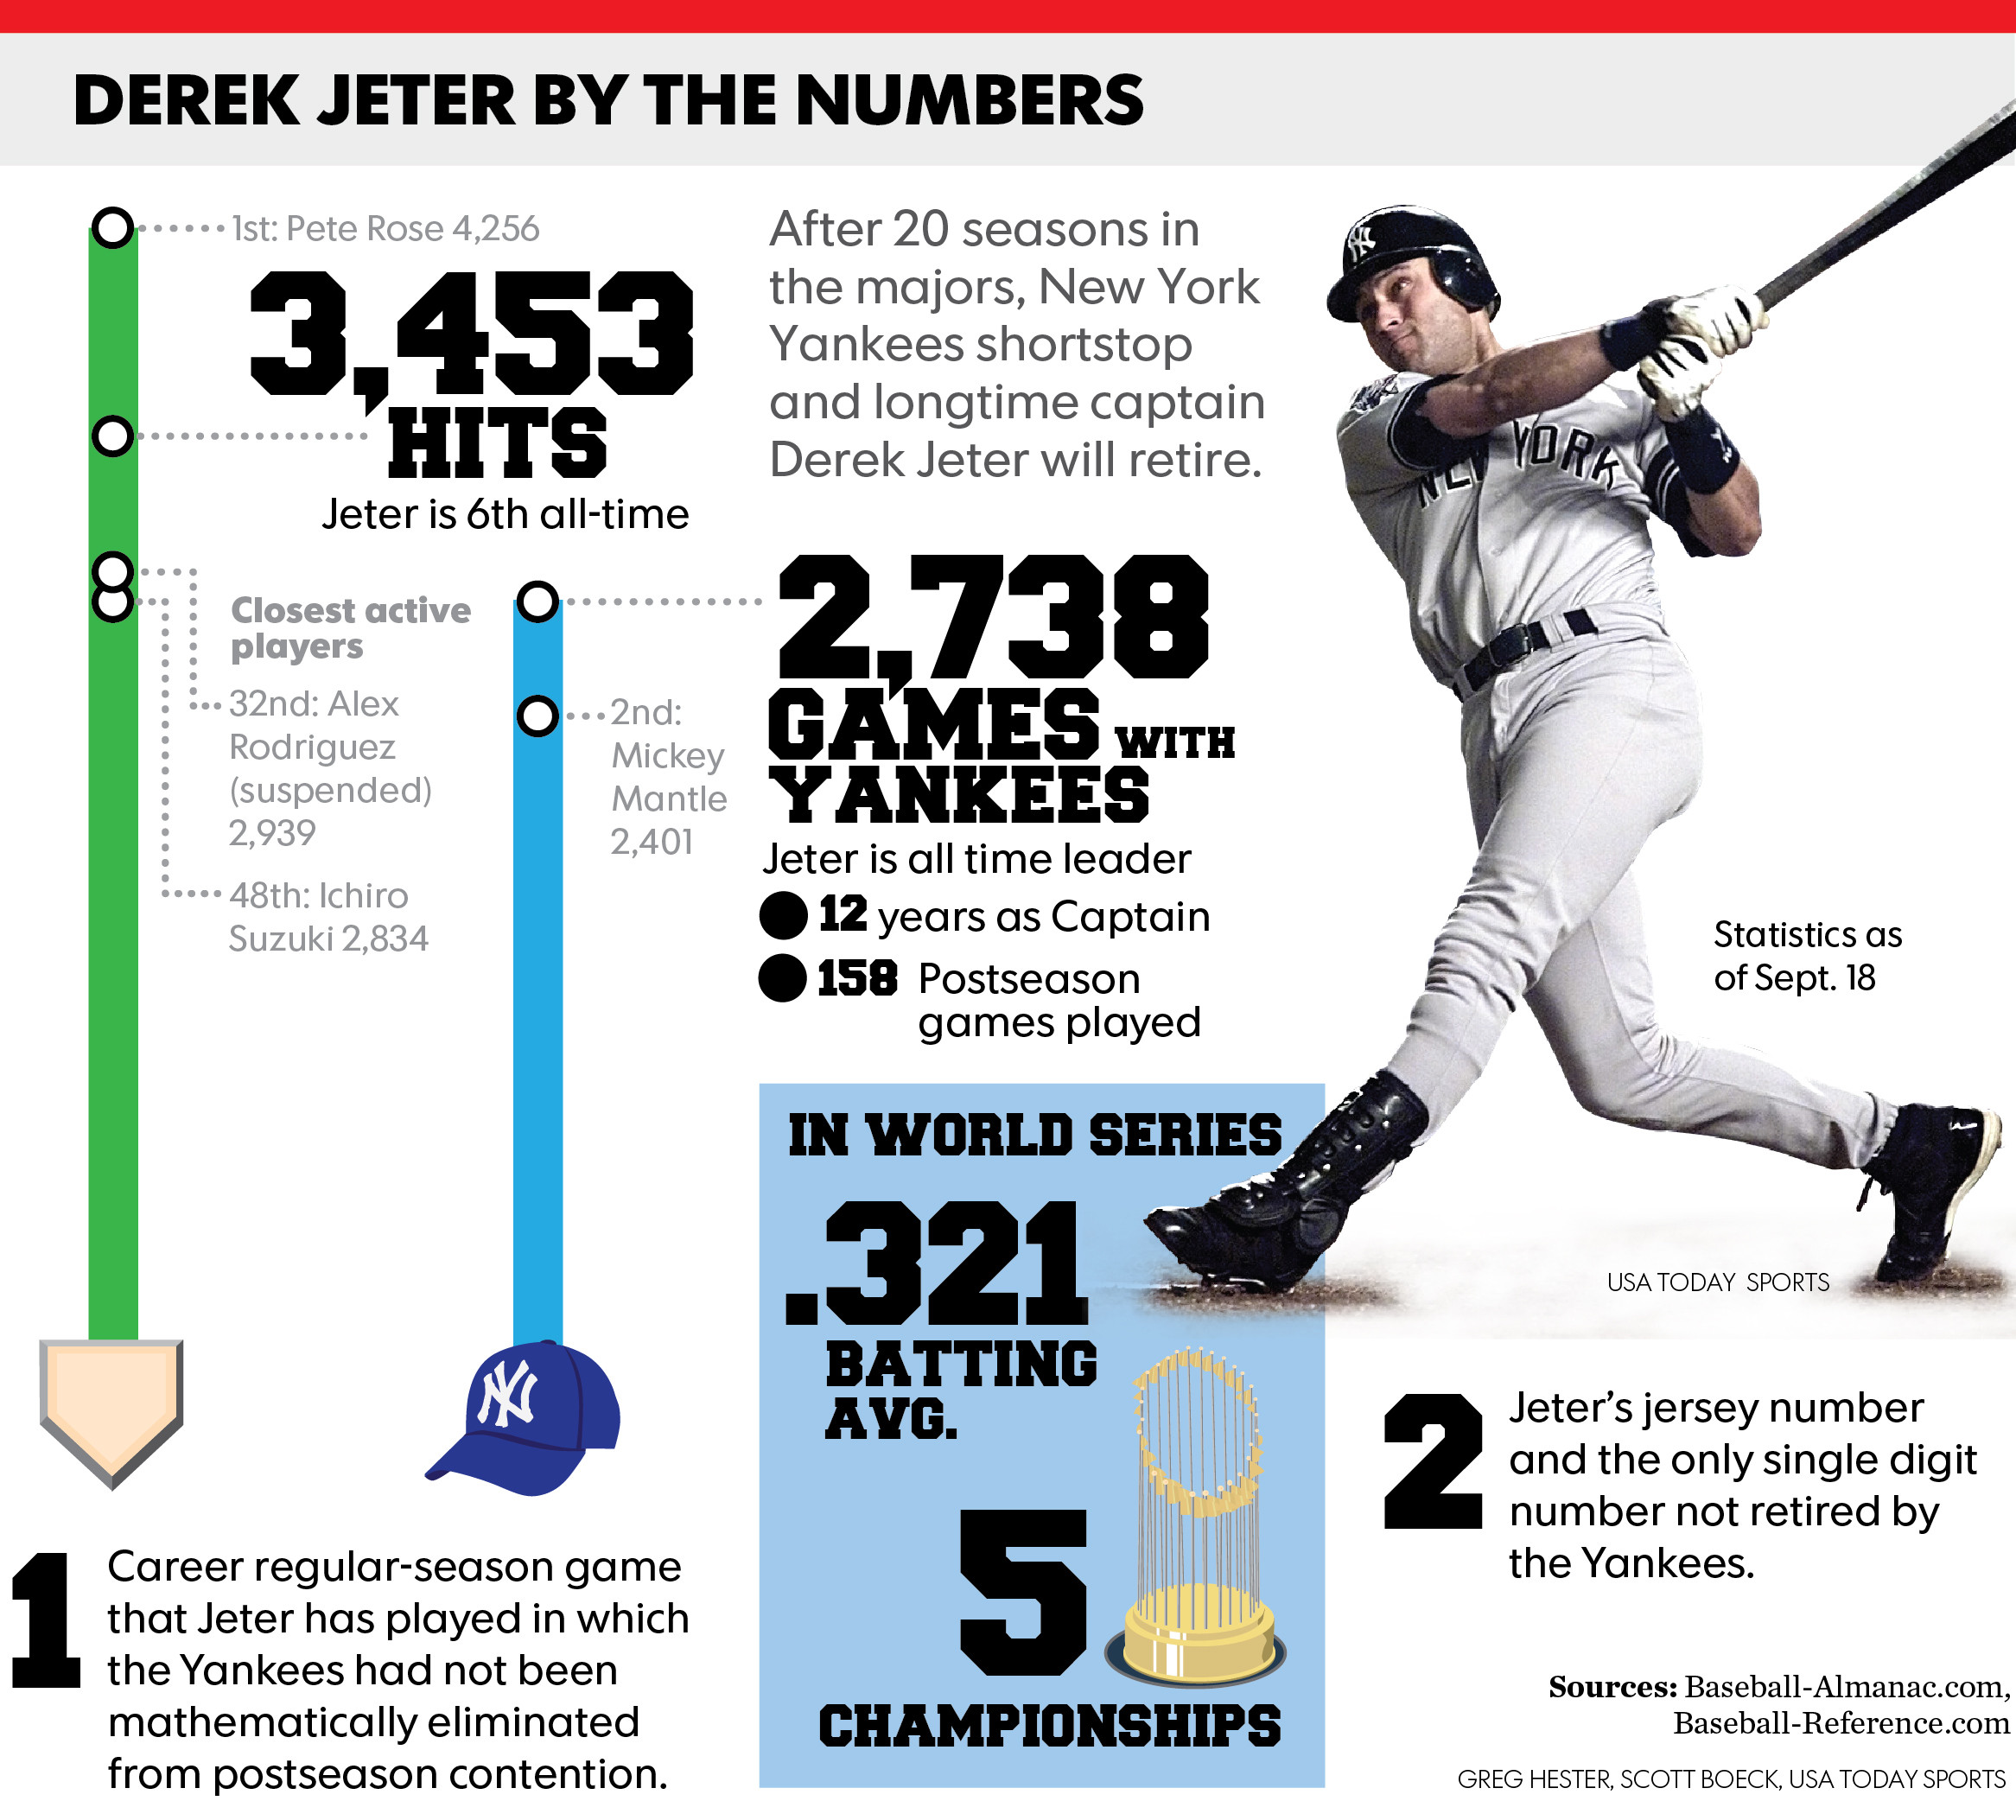 Jeter's greatness above the stats